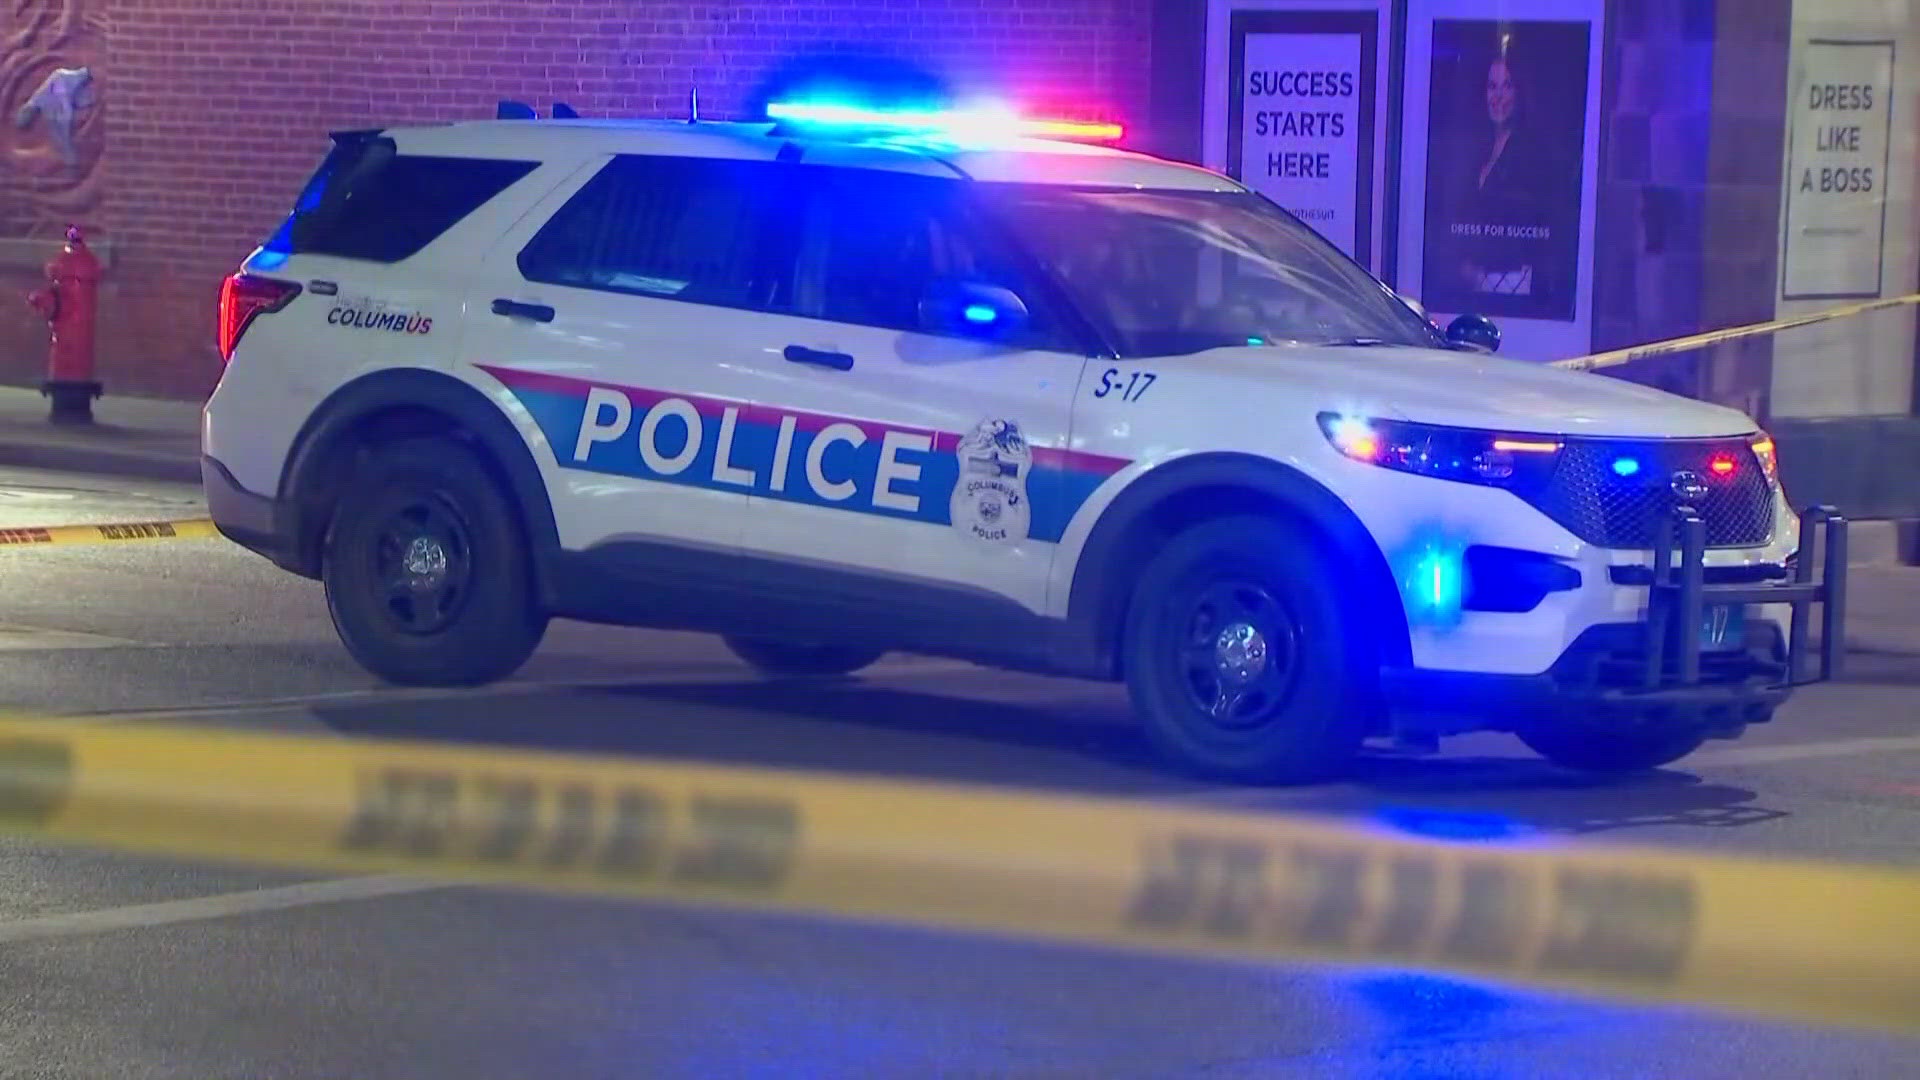 Ten people, including two teenagers, were injured after a shooting in the Short North Arts District early Sunday morning, according to Columbus police.